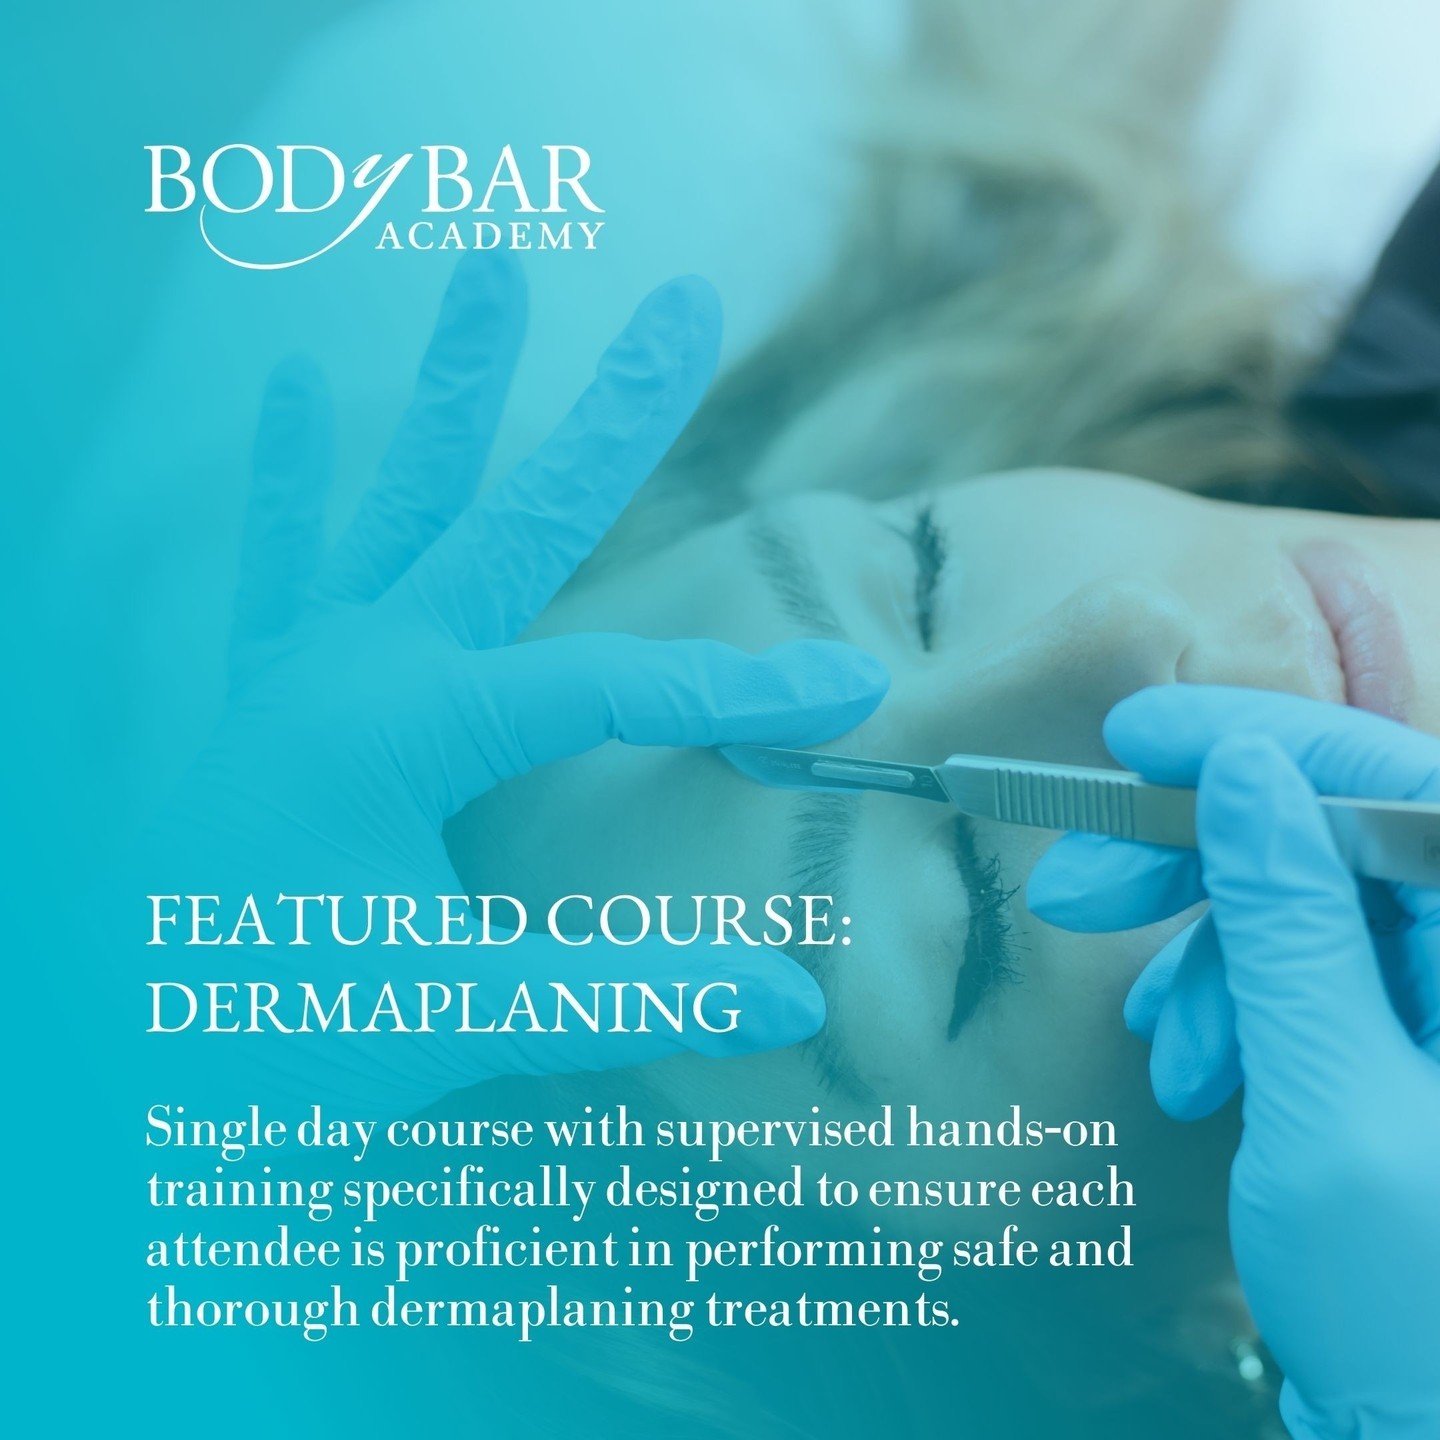 Looking to master dermaplaning treatments? Look no further! Our single-day course offers expert guidance and supervised hands-on training to ensure you leave feeling confident and proficient.⁠
⁠
Dermaplaning isn't just a trend&mdash;it's a highly eff